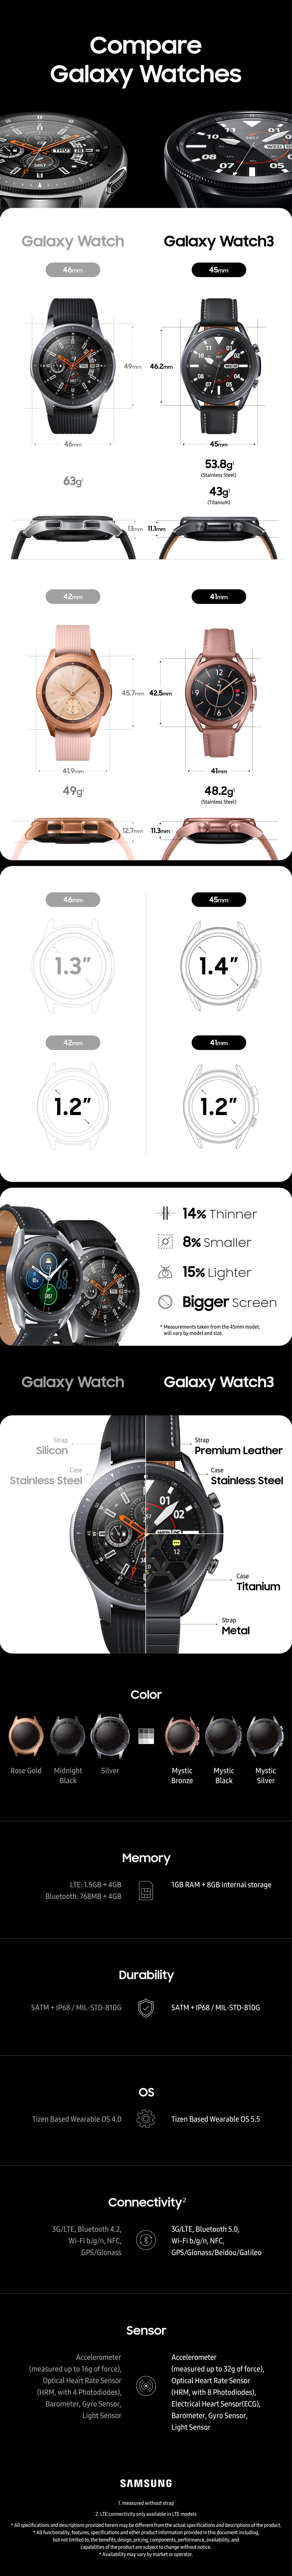 Introducing Galaxy Watch3's specifications in detail